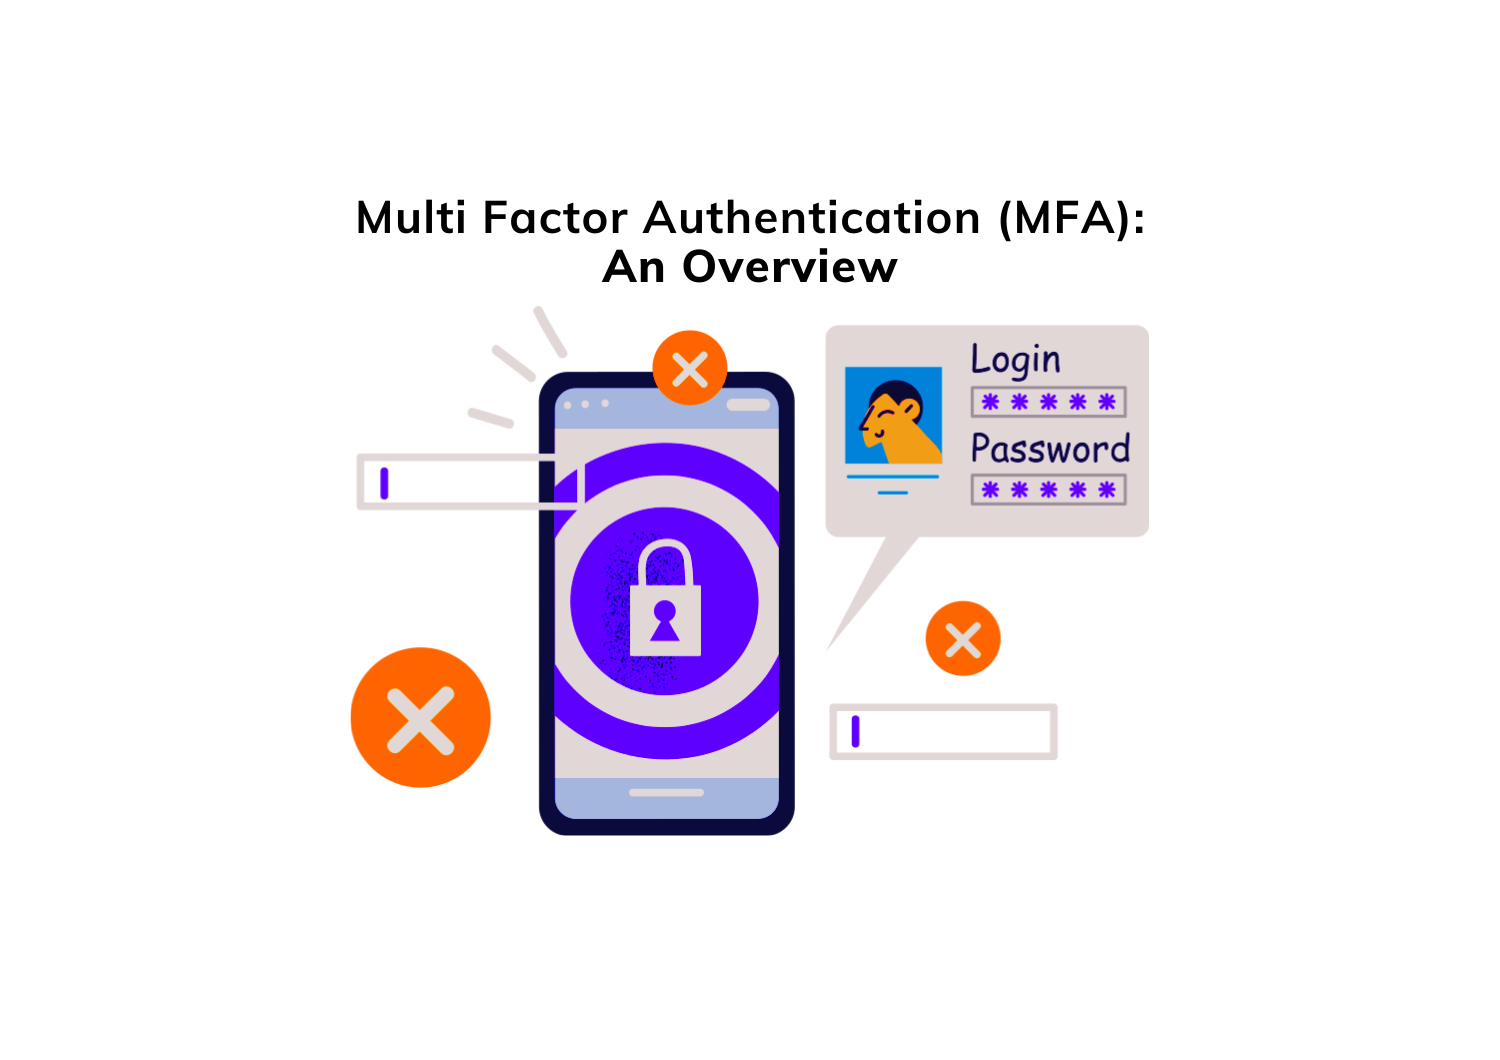 MFA: What is Multi Factor Authentication, and what are some of its benefits? eVero Corporation 2022